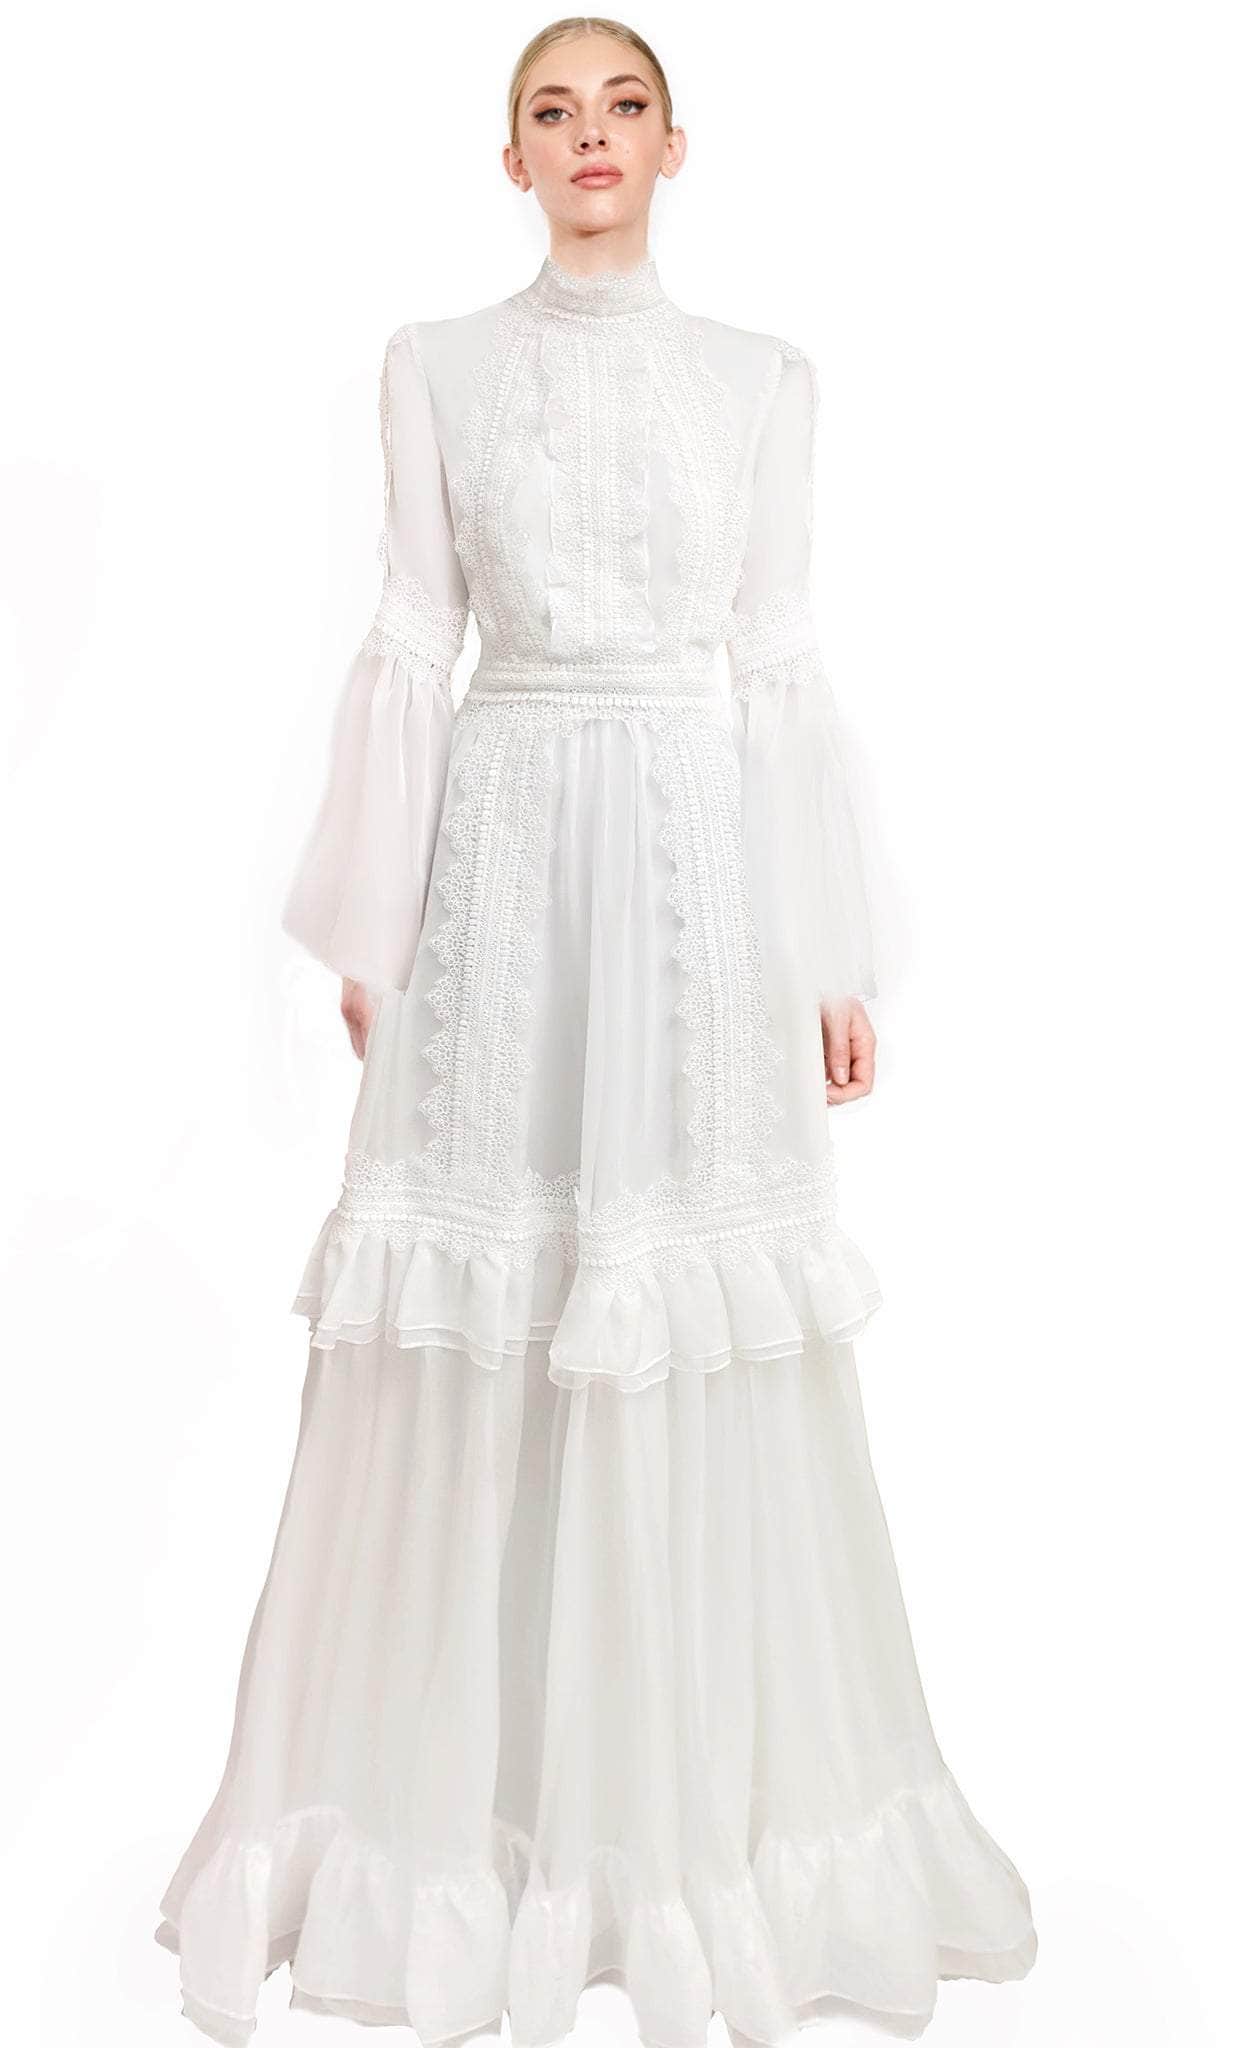 Janique 22102 - Bell Sleeve Lace Evening Gown Special Occasion Dress 0 / Ivory